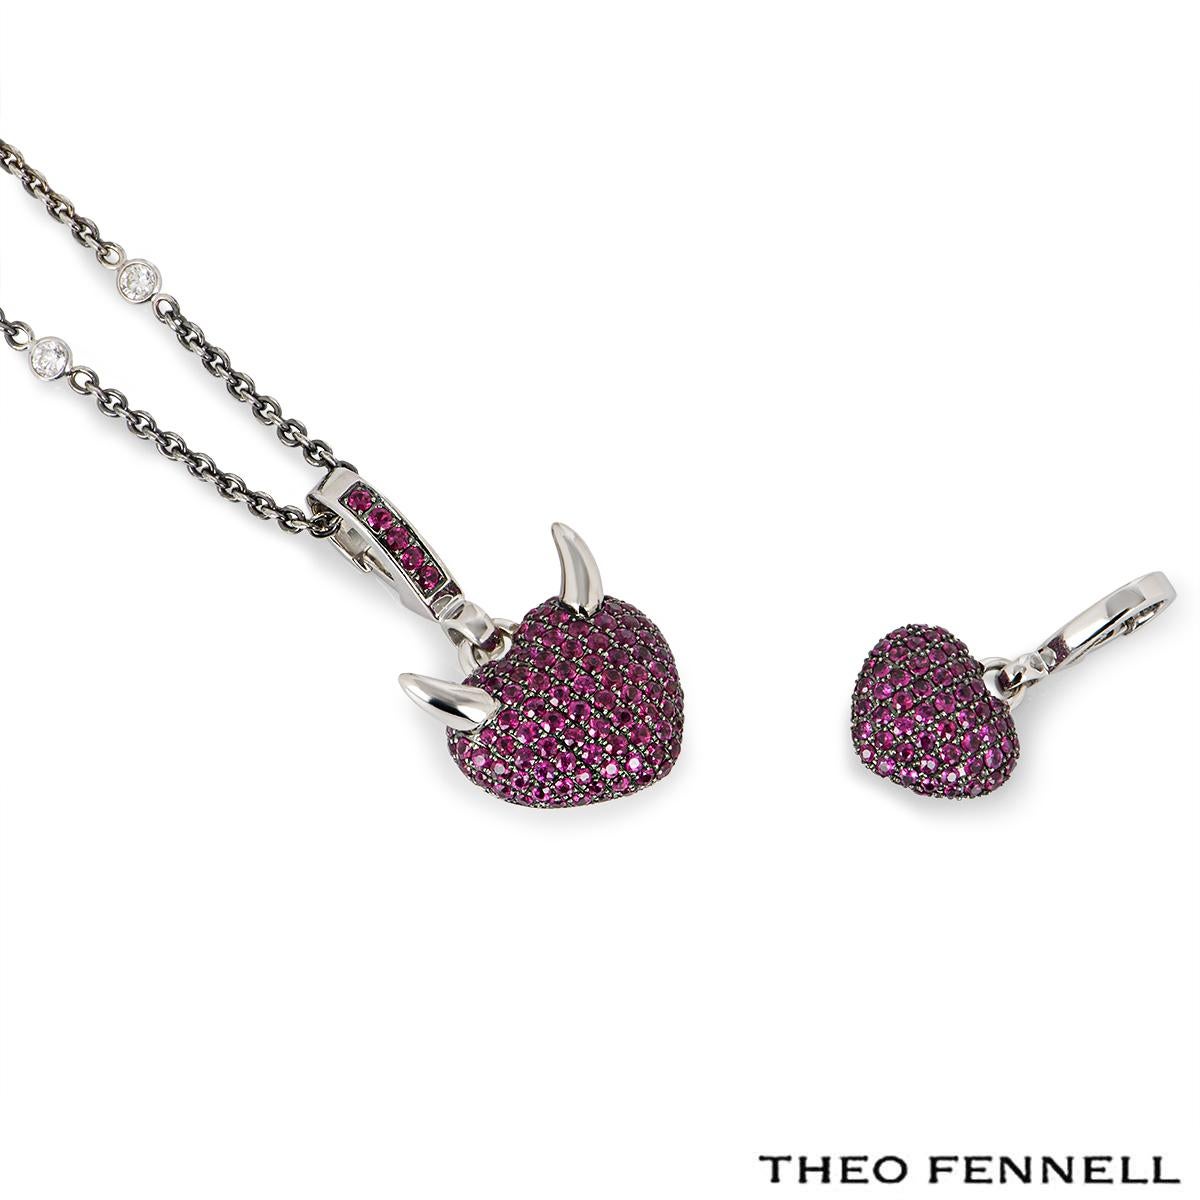 A captivating 18k white gold ruby & diamond jewellery suite by Theo Fennell from the 'Arts collection. The suite comprises of a pendant on chain and a charm. The pendant features a heart motif with devil horns and is pave set with round rubies to